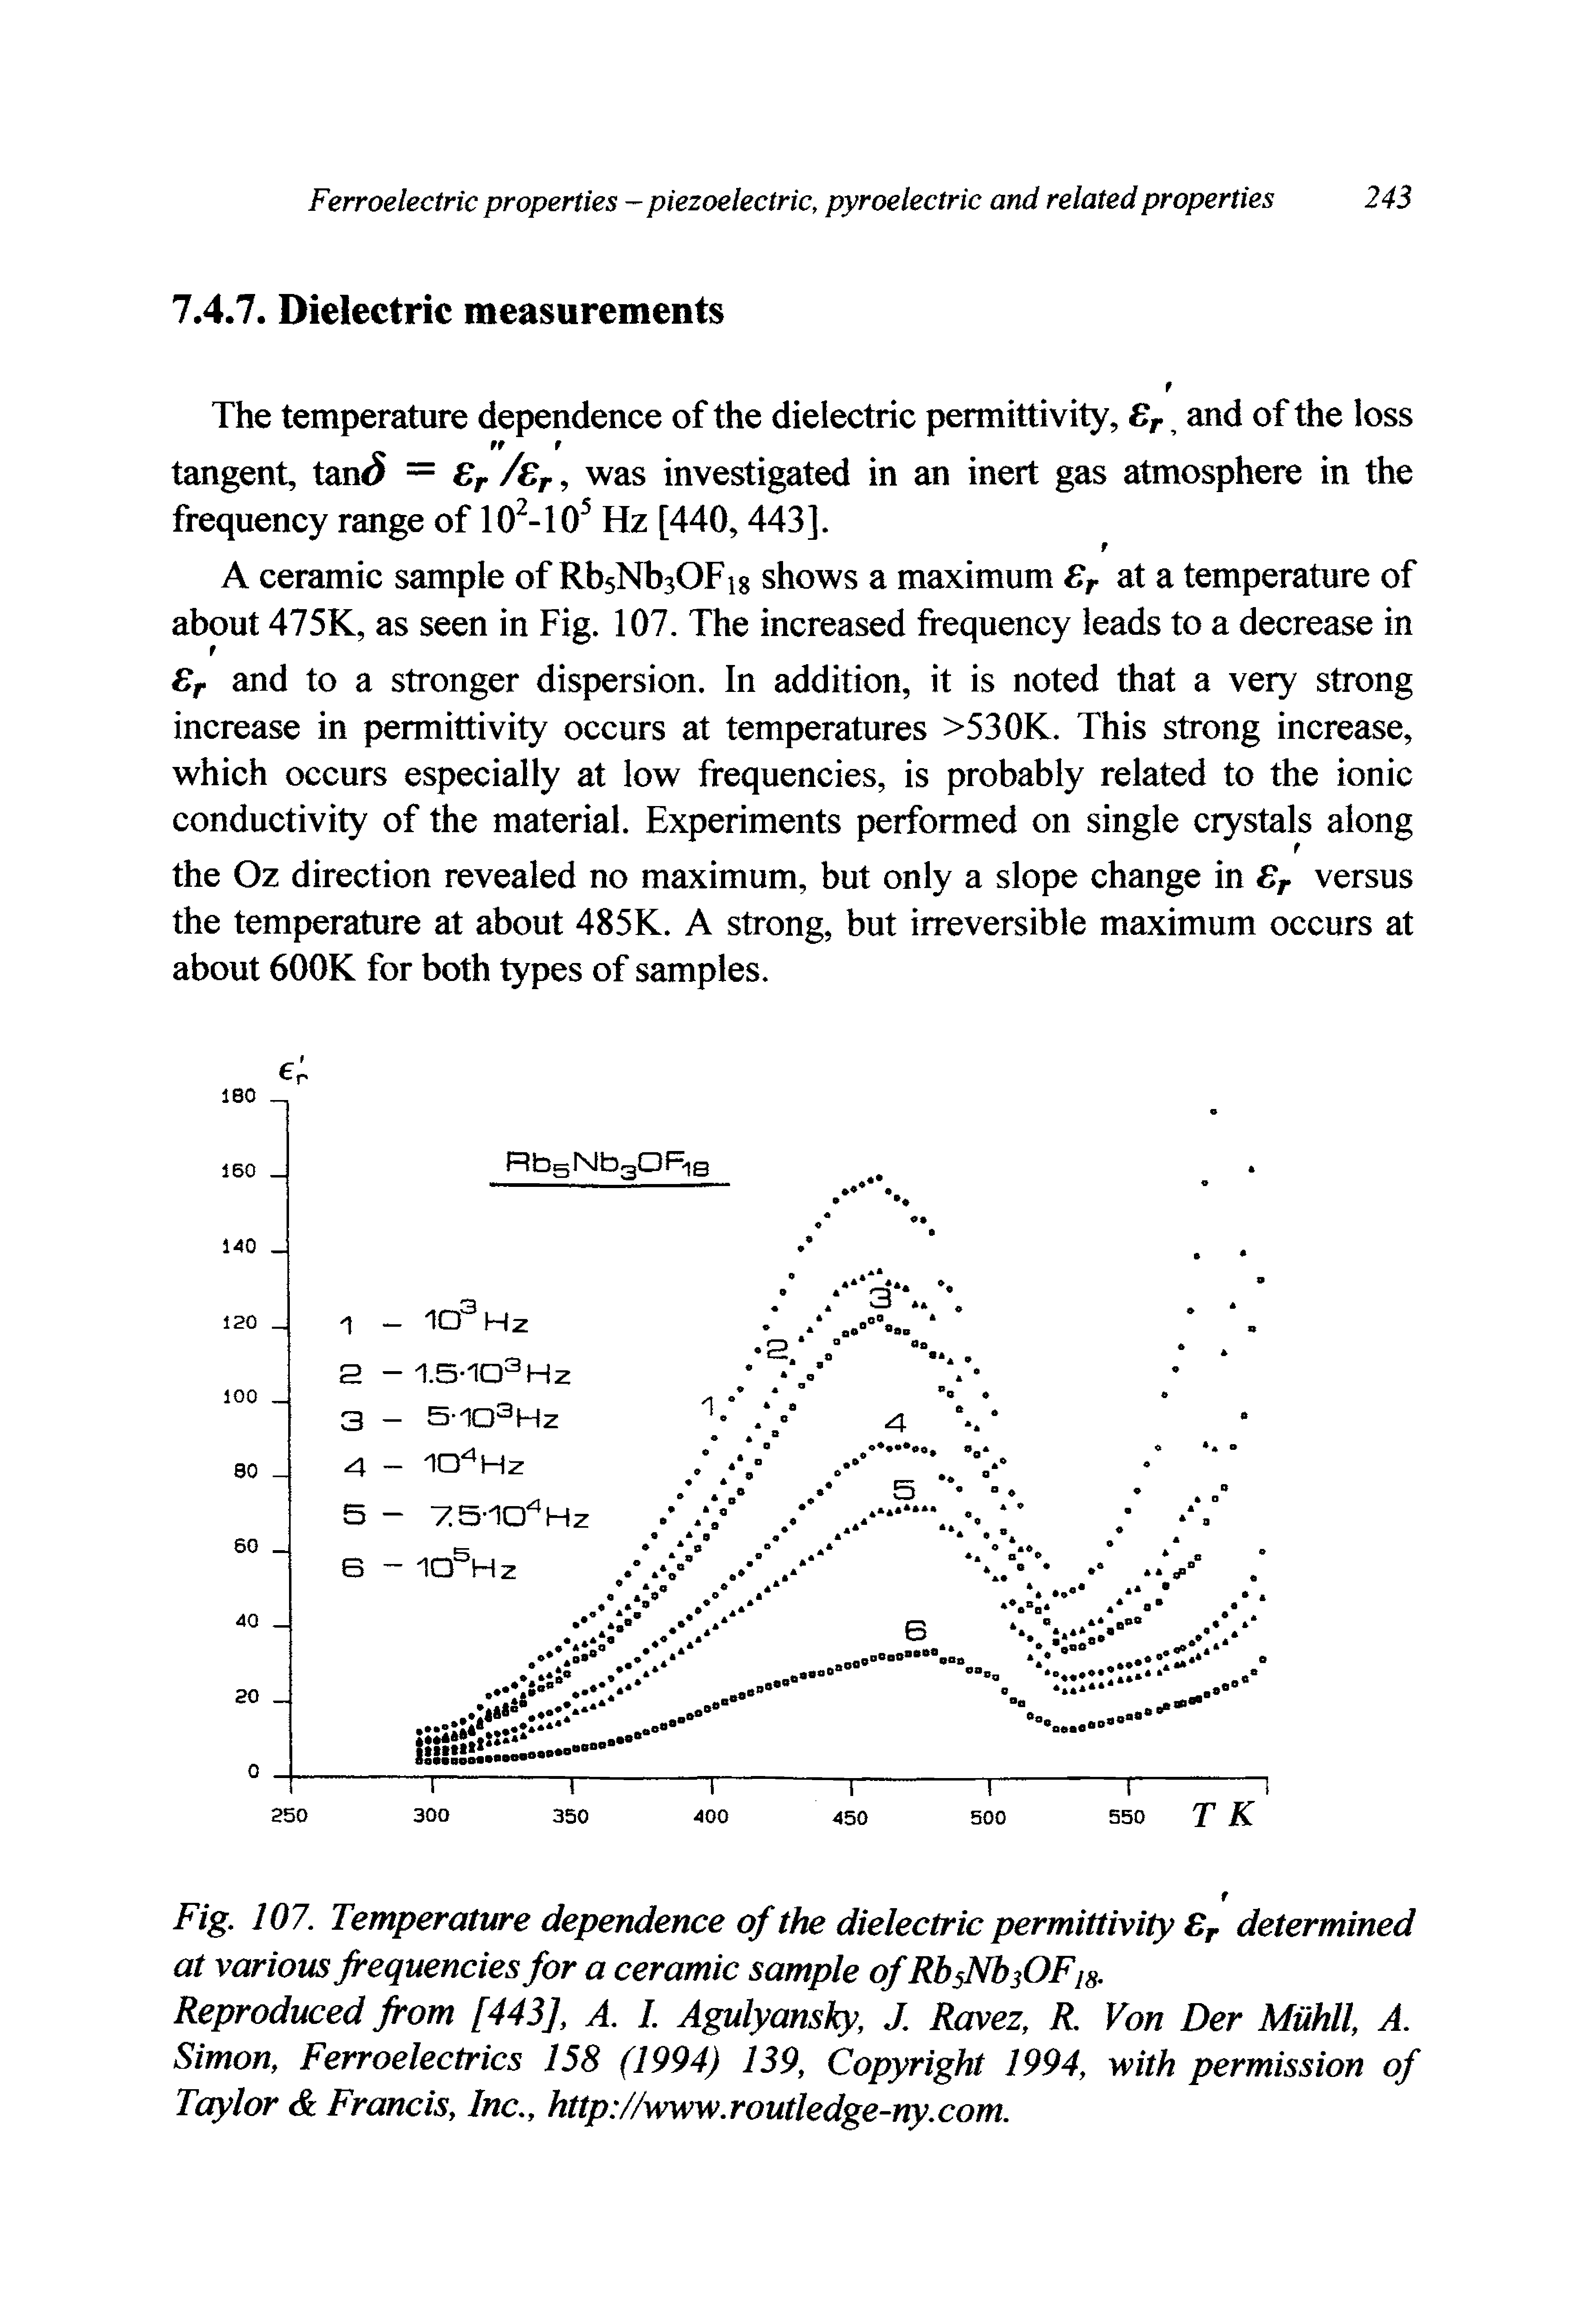 Fig. 107. Temperature dependence of the dielectric permittivity r determined at various frequencies for a ceramic sample ofRbsNb3OF,H.